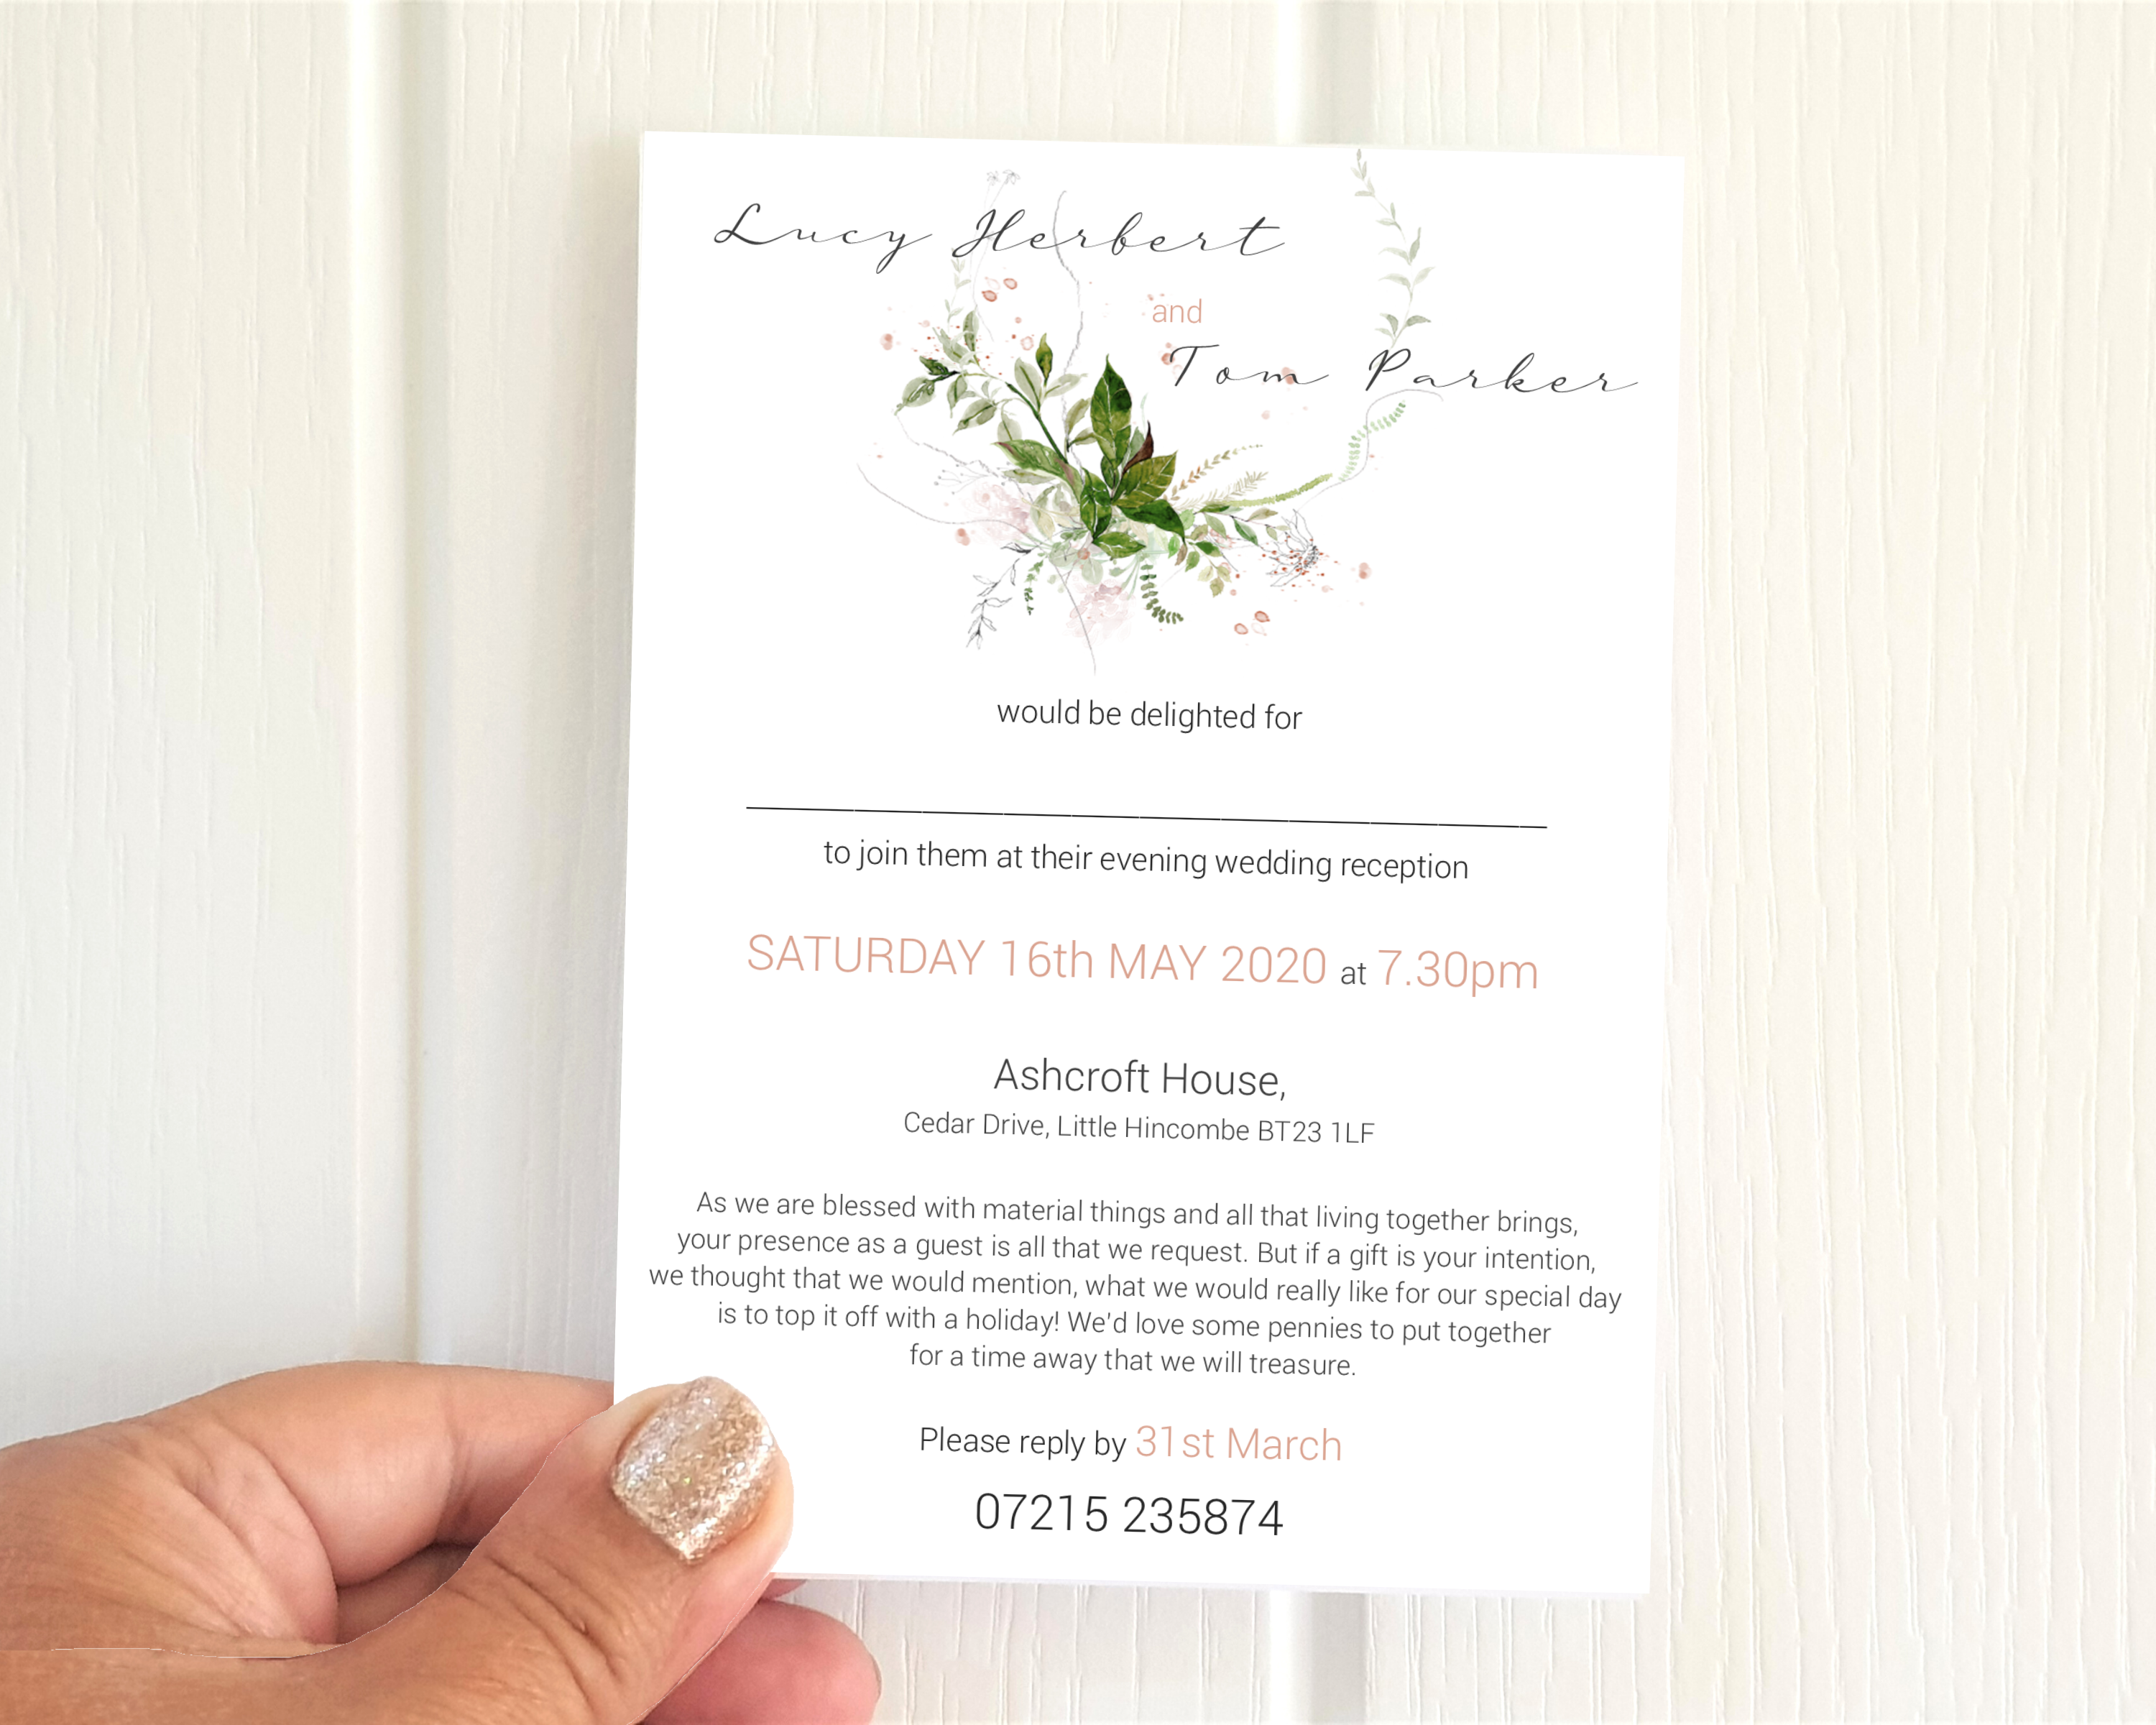 Blush flower and greenery A6 Poppleberry wedding evening / reception invitation, with pencil sketch flowers, held up.